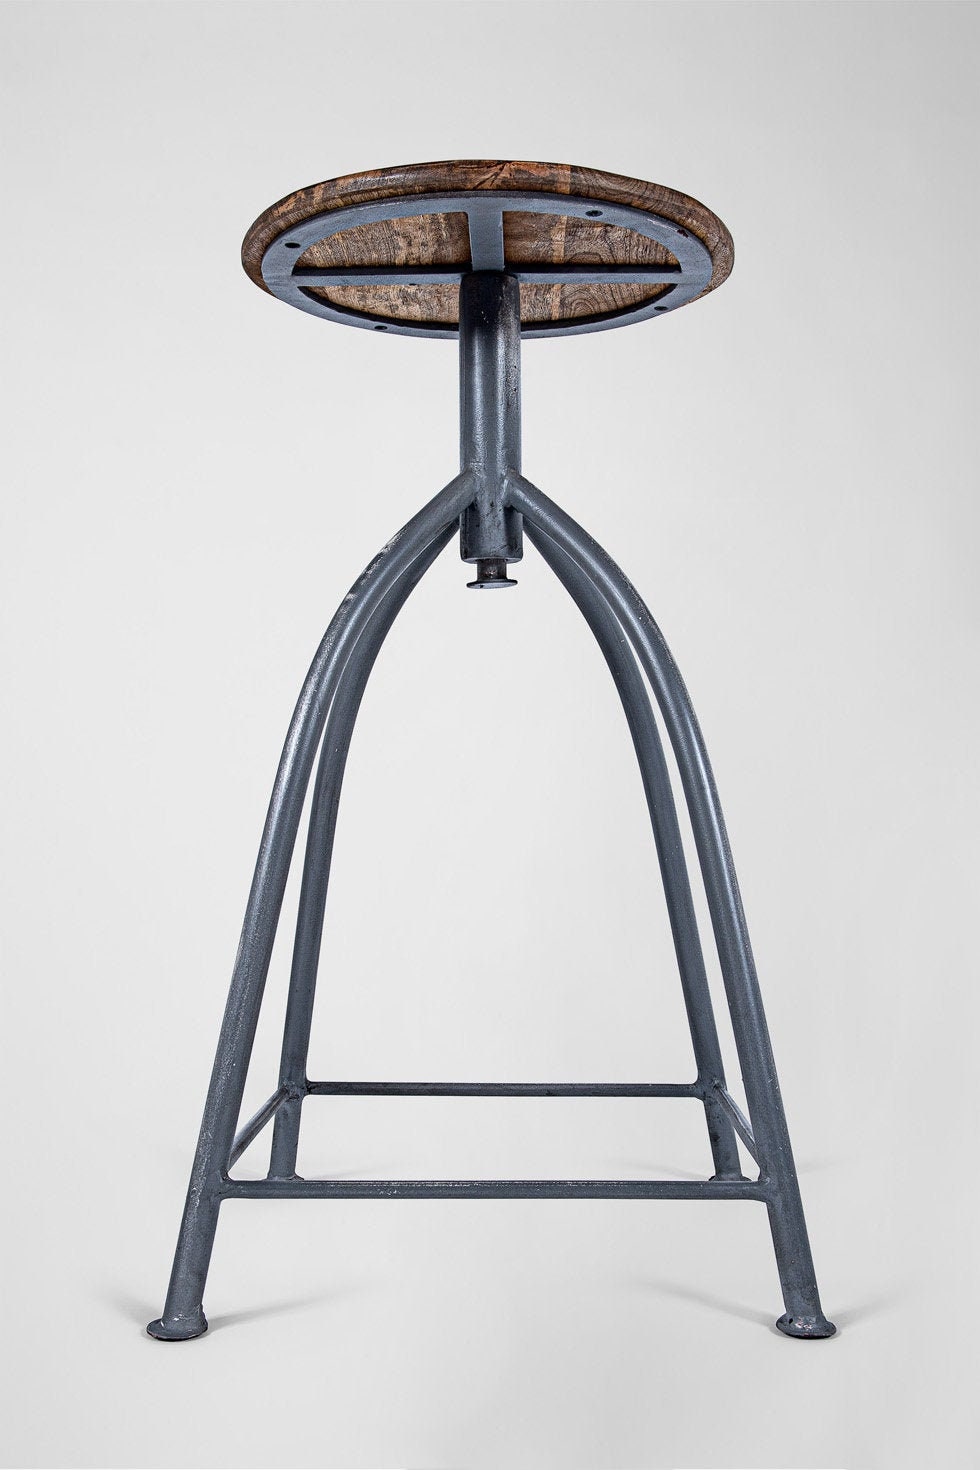 Mrs. Greyhound - Retro Vintage Industrial Design Metal Stool with Wooden Seat